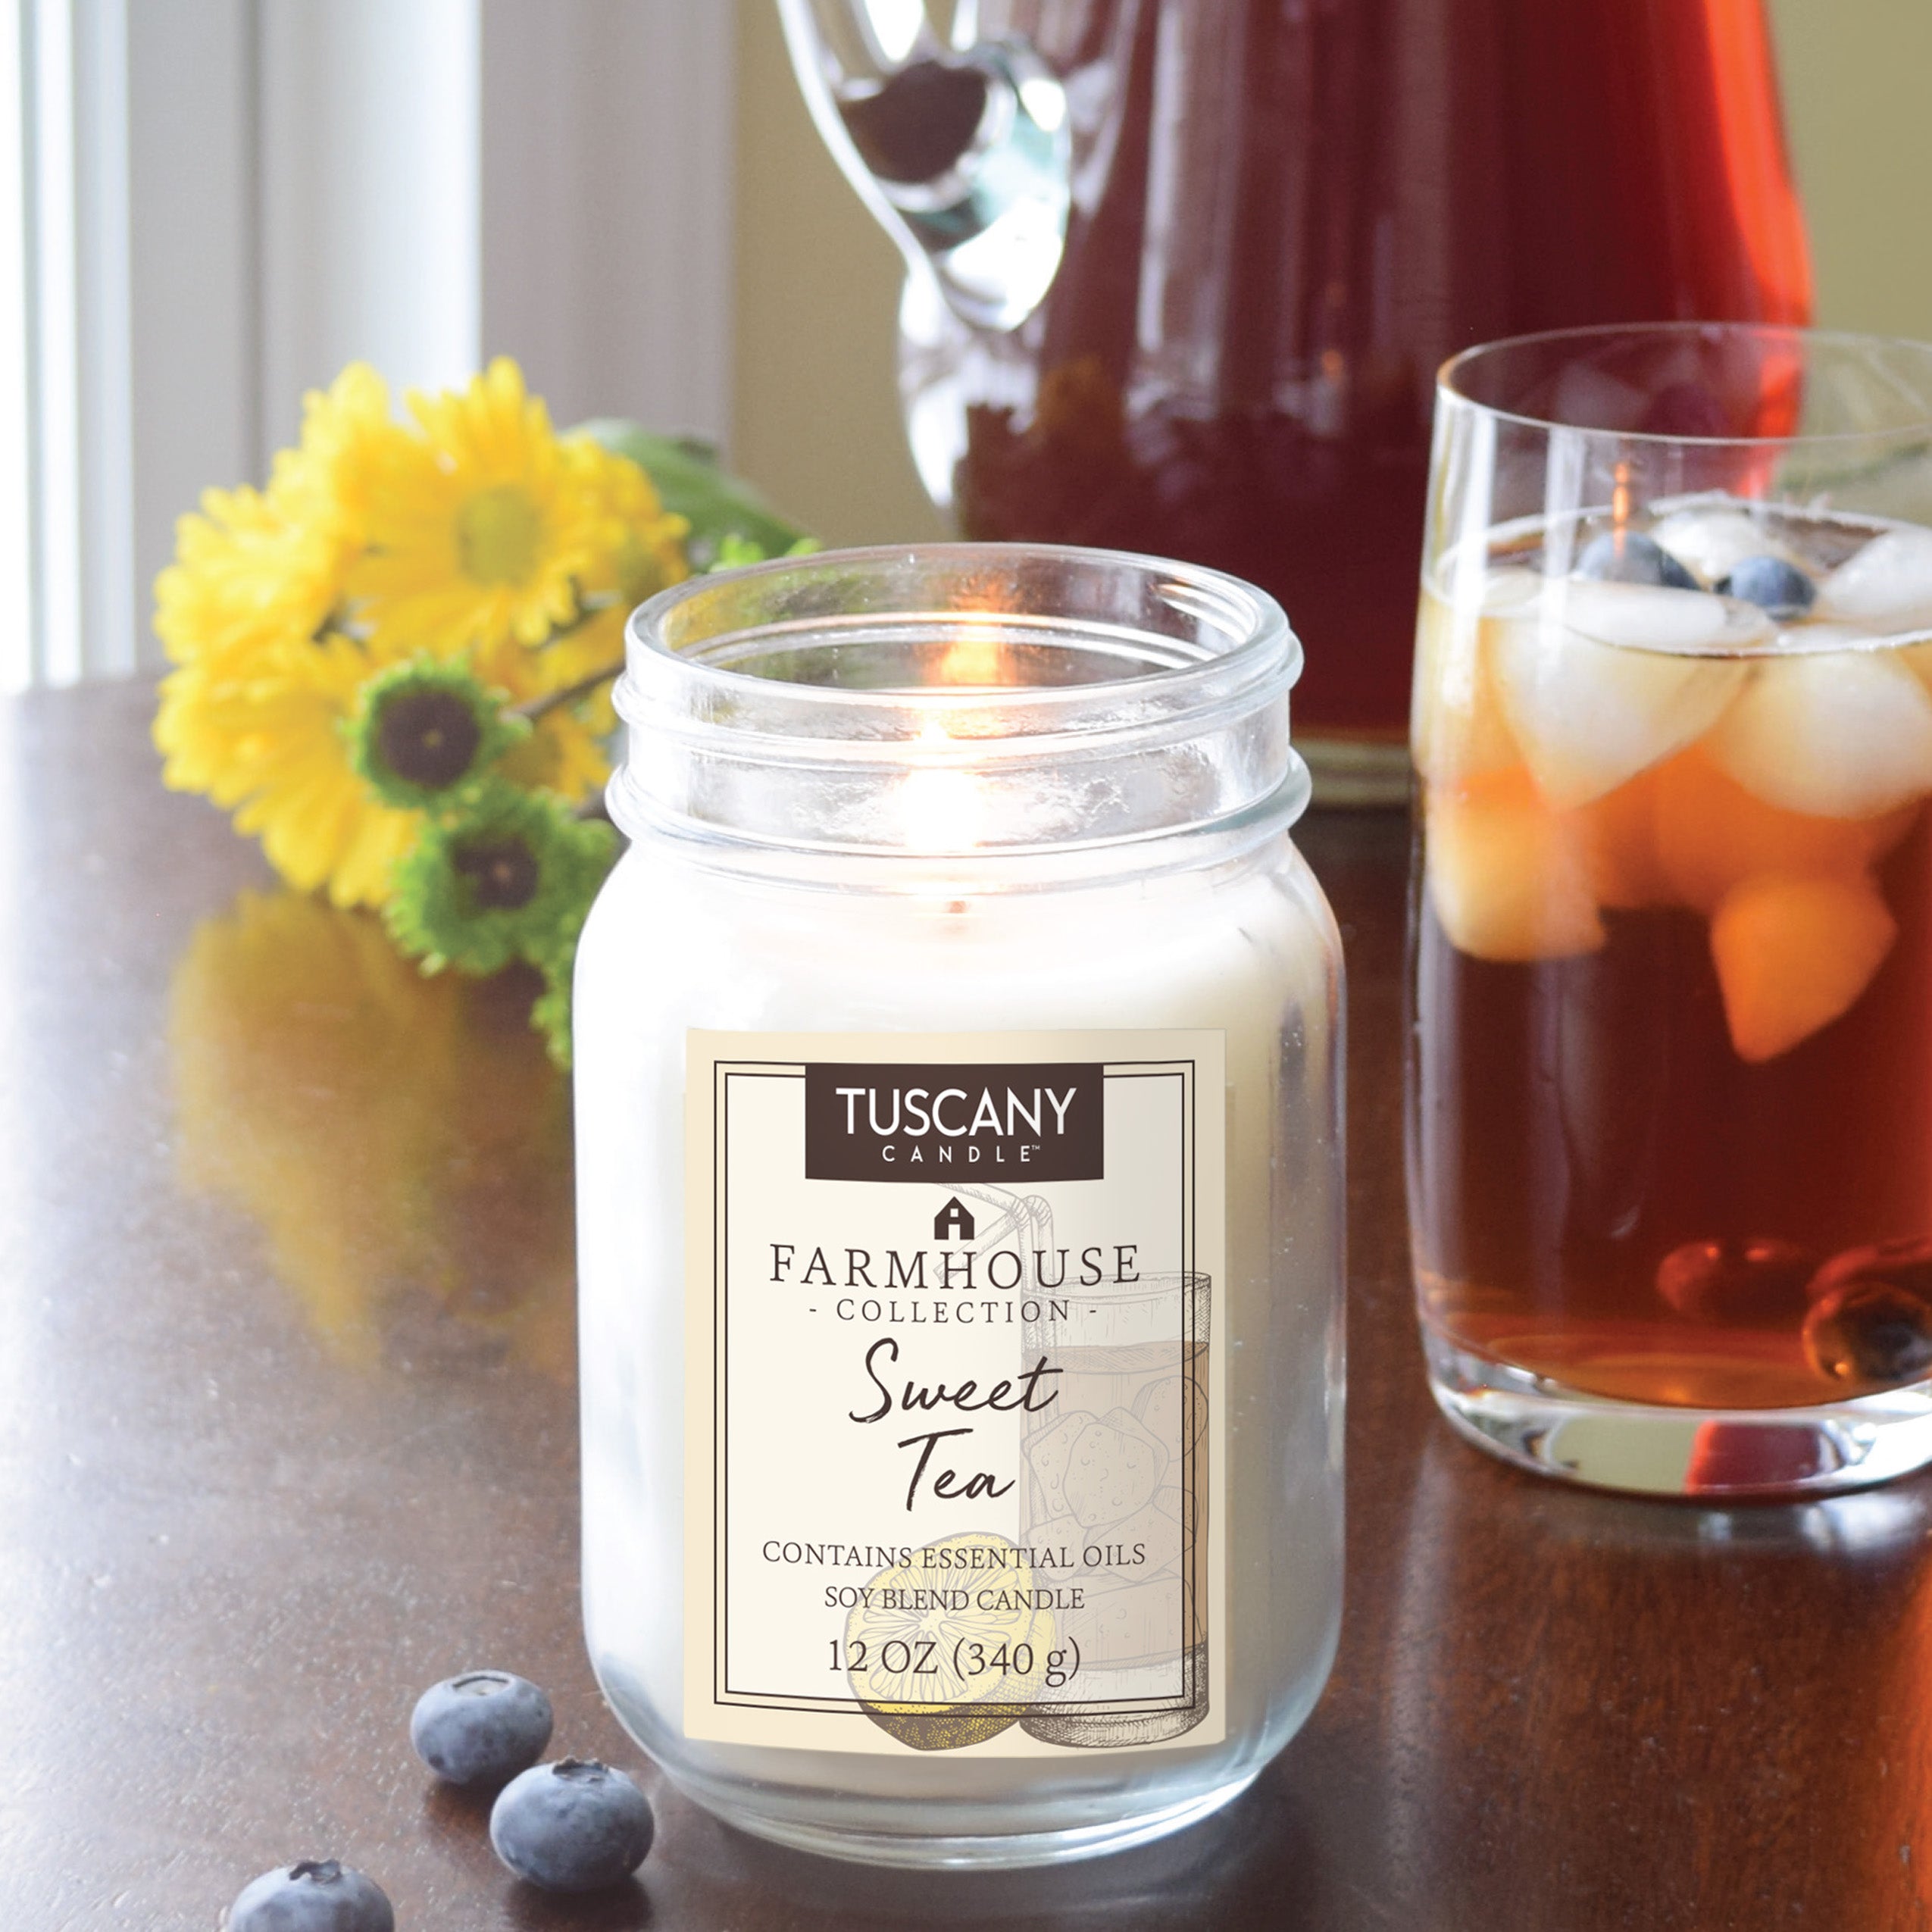 A Sweet Tea Scented Jar Candle (12 oz) from the Farmhouse Collection by Tuscany Candle on a table, exuding southern charm and nostalgic vibes.